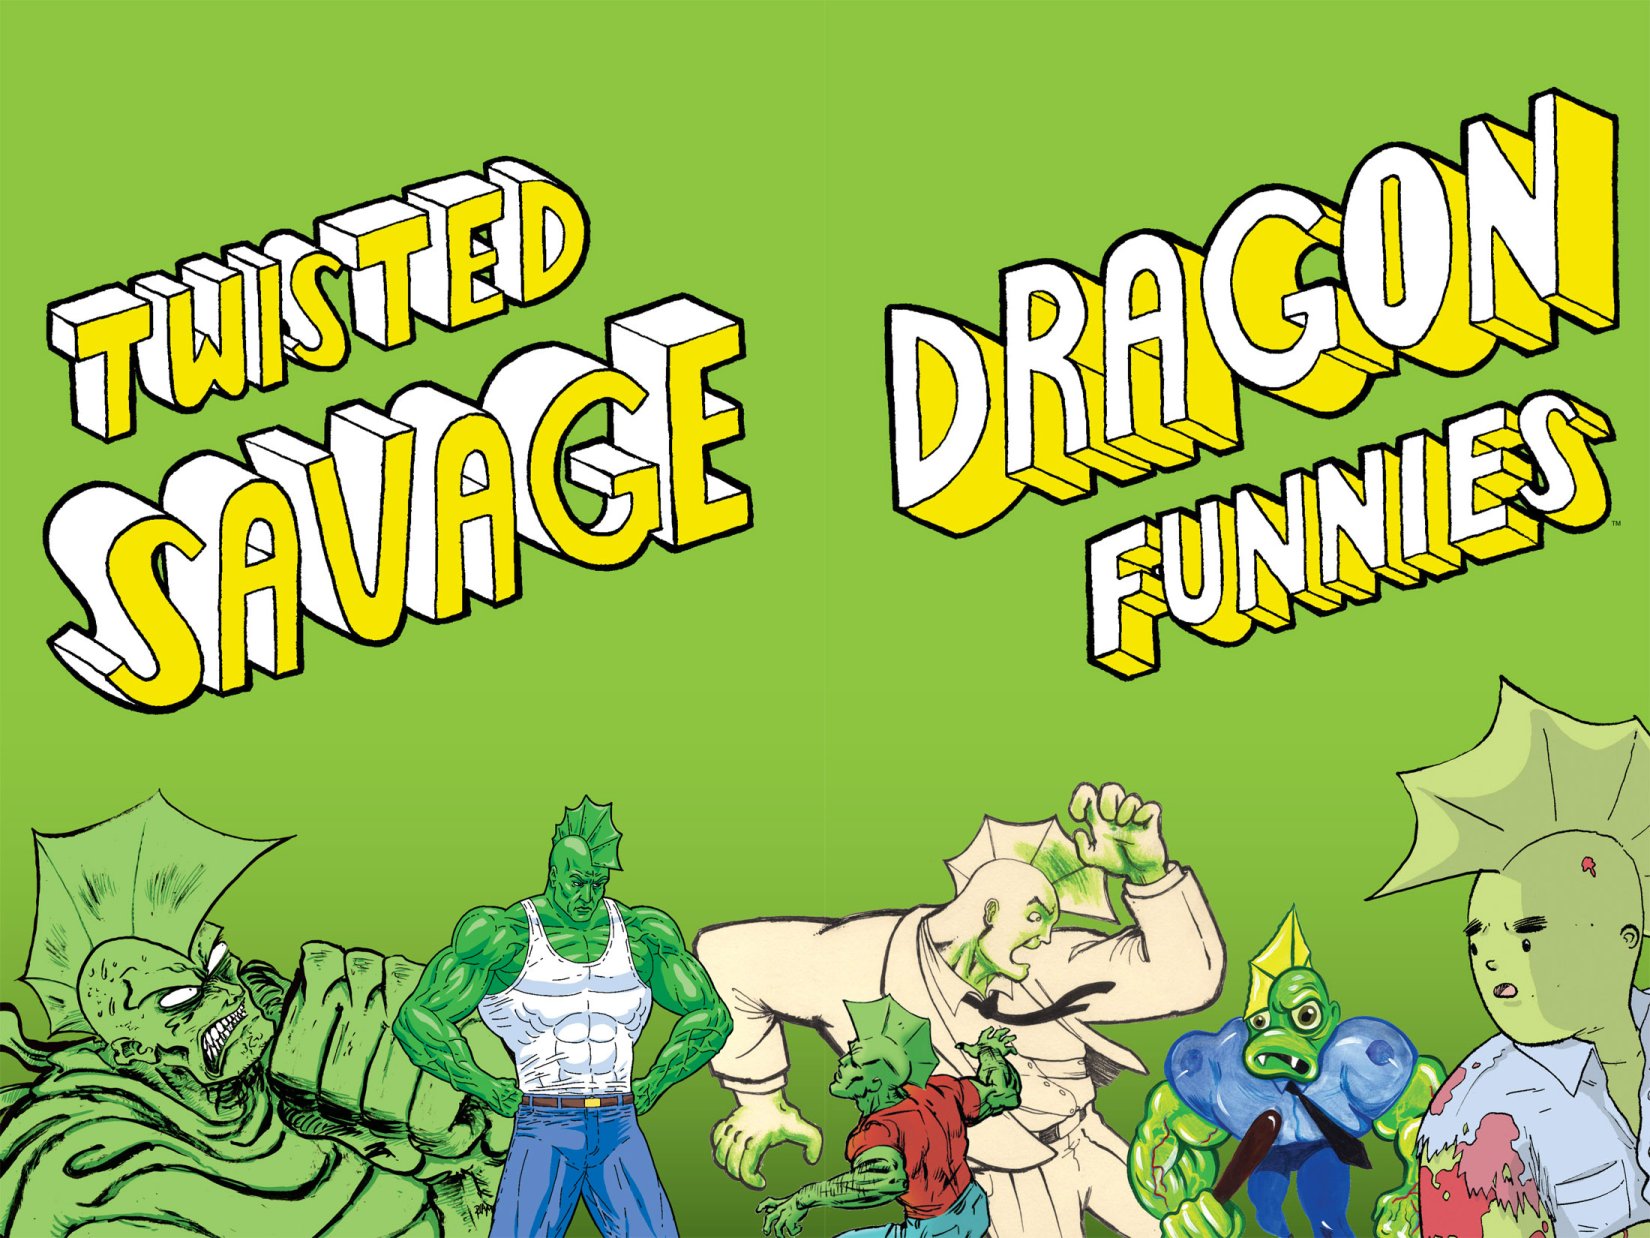 Read online Twisted Savage Dragon Funnies comic -  Issue # TPB - 4